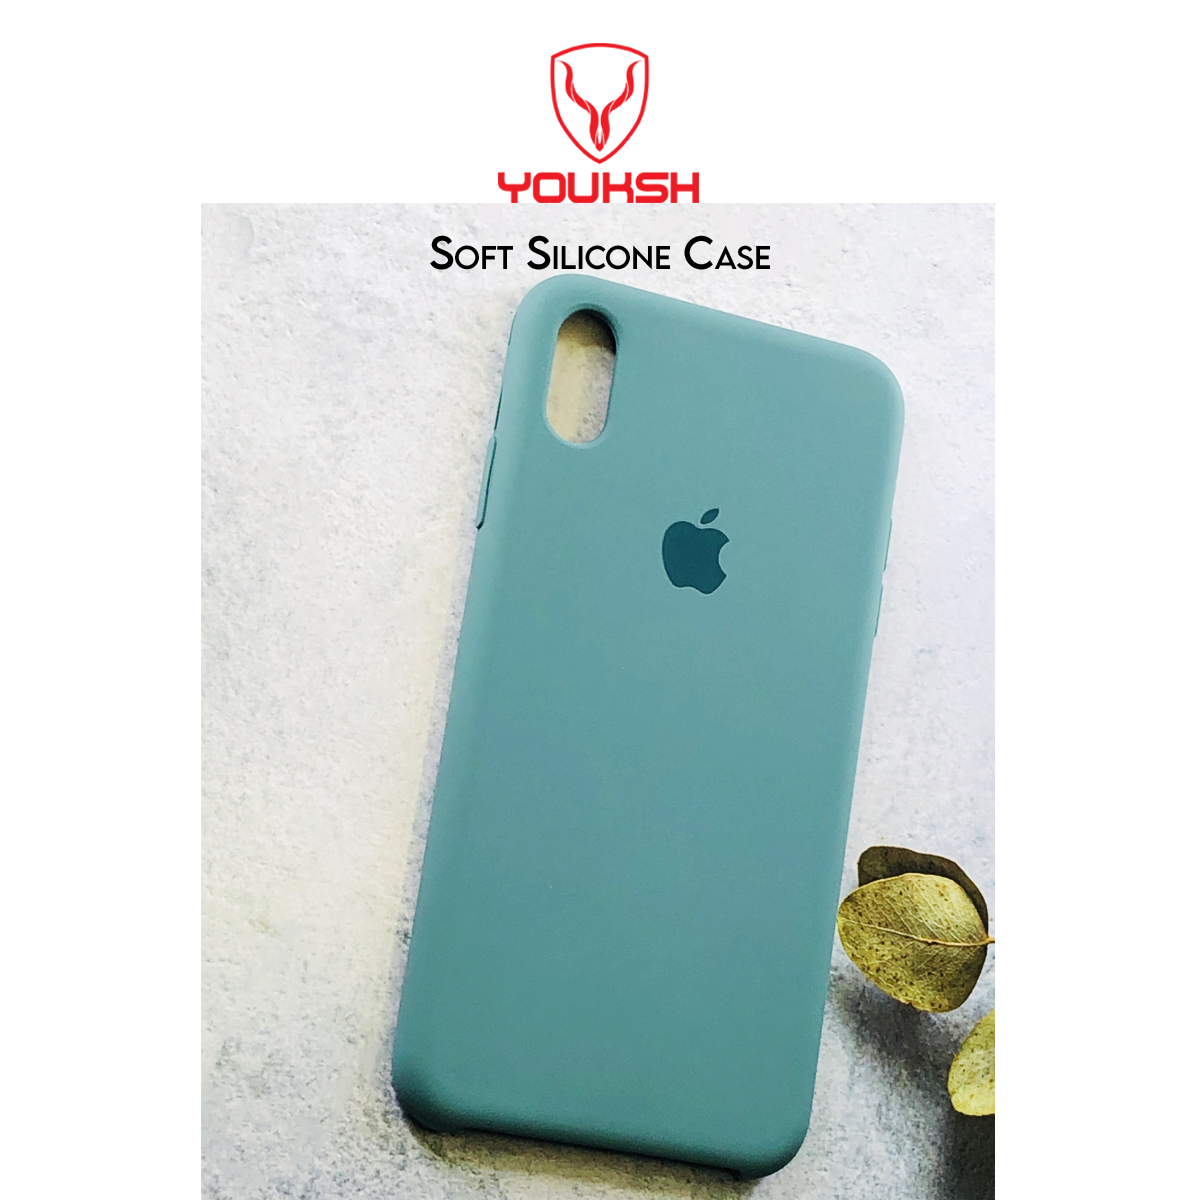 Apple iPhone X/Xs - Youksh Premium Ultra Slim Shockproof Liquid Silky Silicone Soft Rubber Comfortable Protective Case.